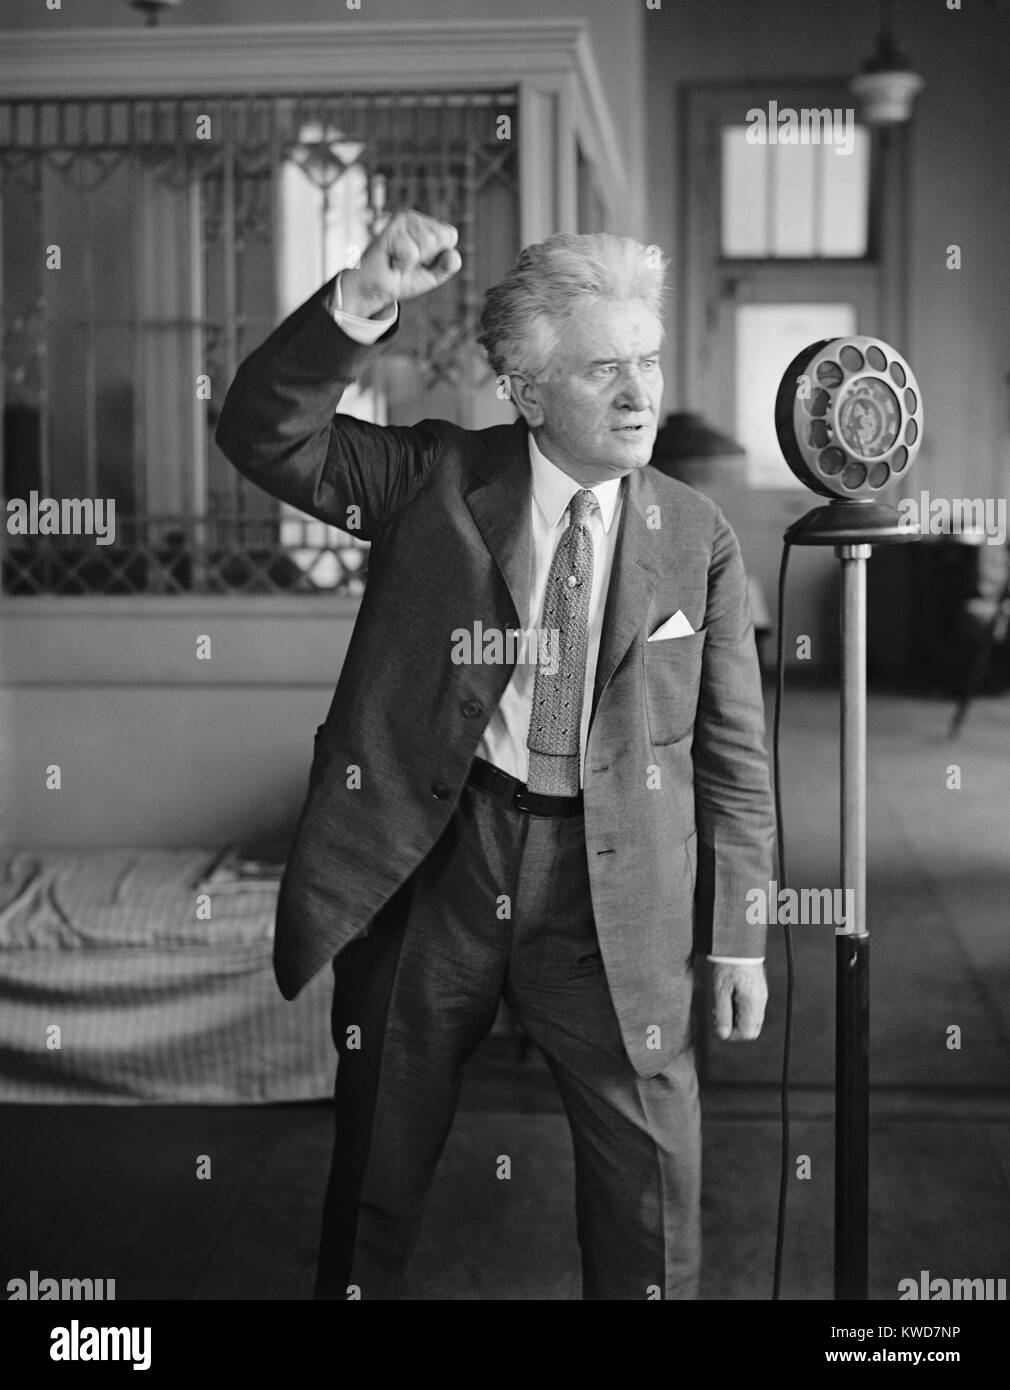 Senator Robert M. La Follette, progressive Democratic speaking into radio microphone. Sept. 1, 1924. His emphatic gesturing would have no effect on his radio audience, as it did from the Speaker's podium. He was campaigning as the Progressive Party nominee against President Coolidge and Democrat John Davis. (BSLOC 2015 16 115) Stock Photo